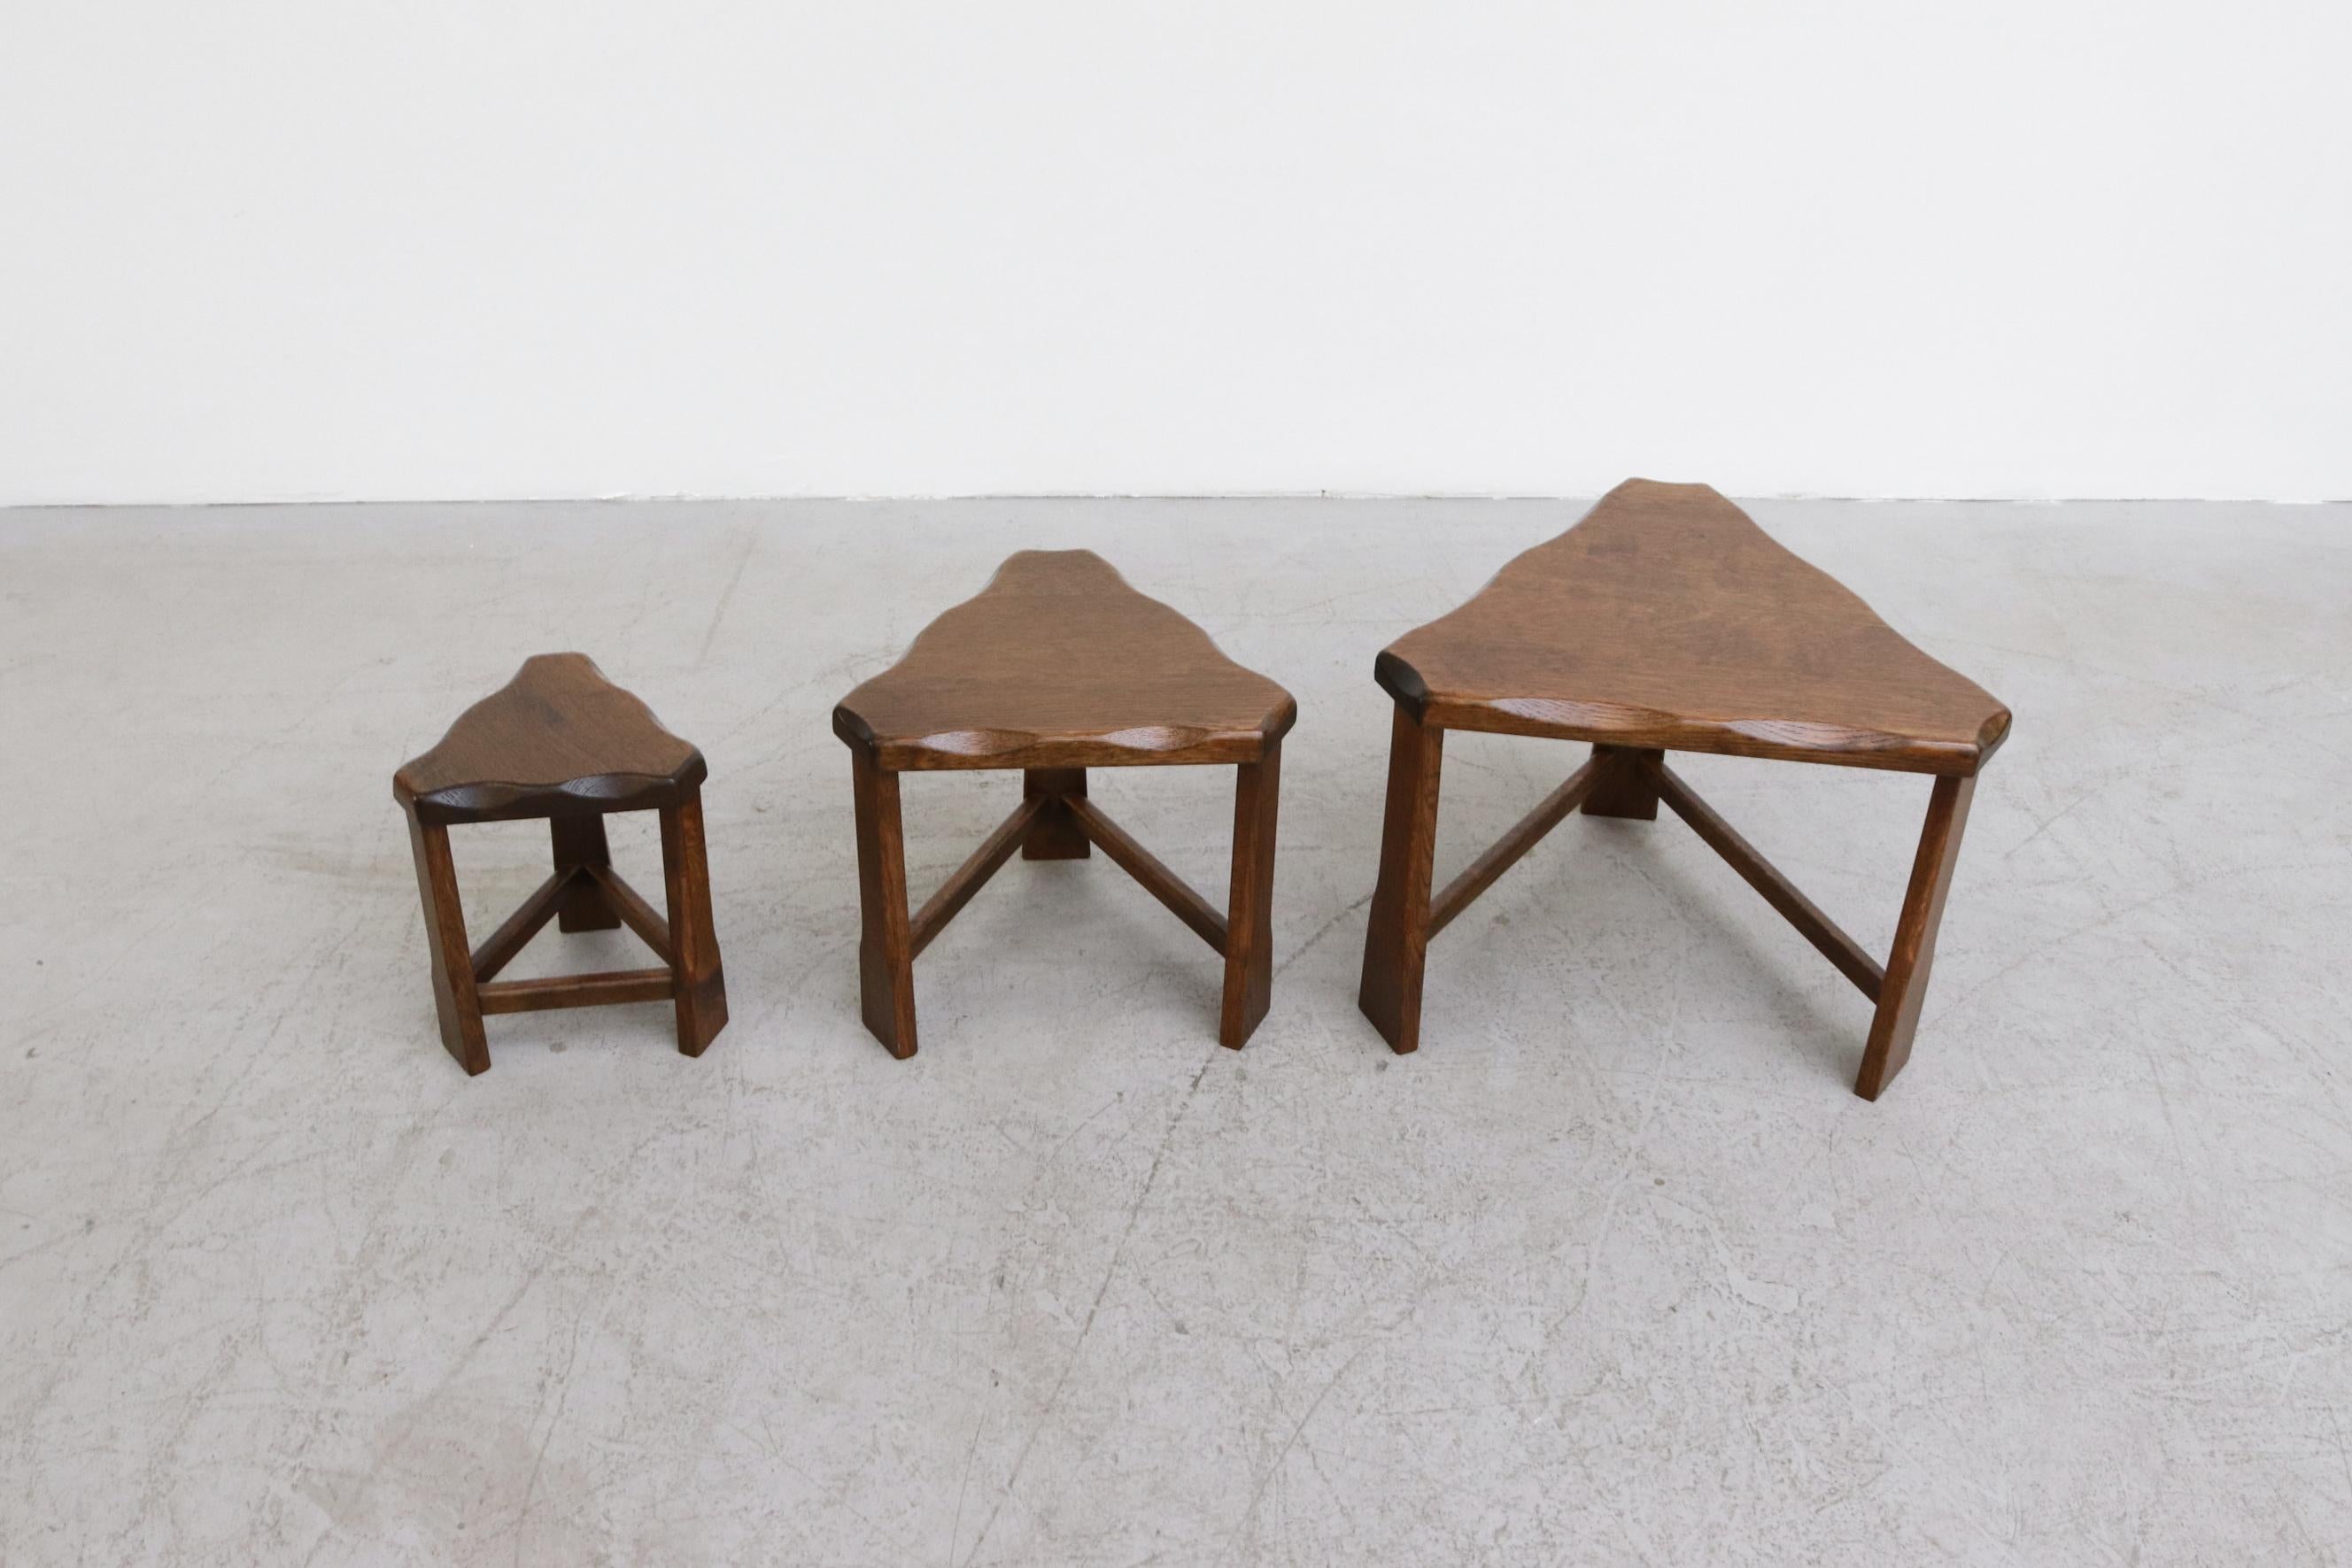 20th Century Set of 3 Triangle Brutalist Nesting Tables